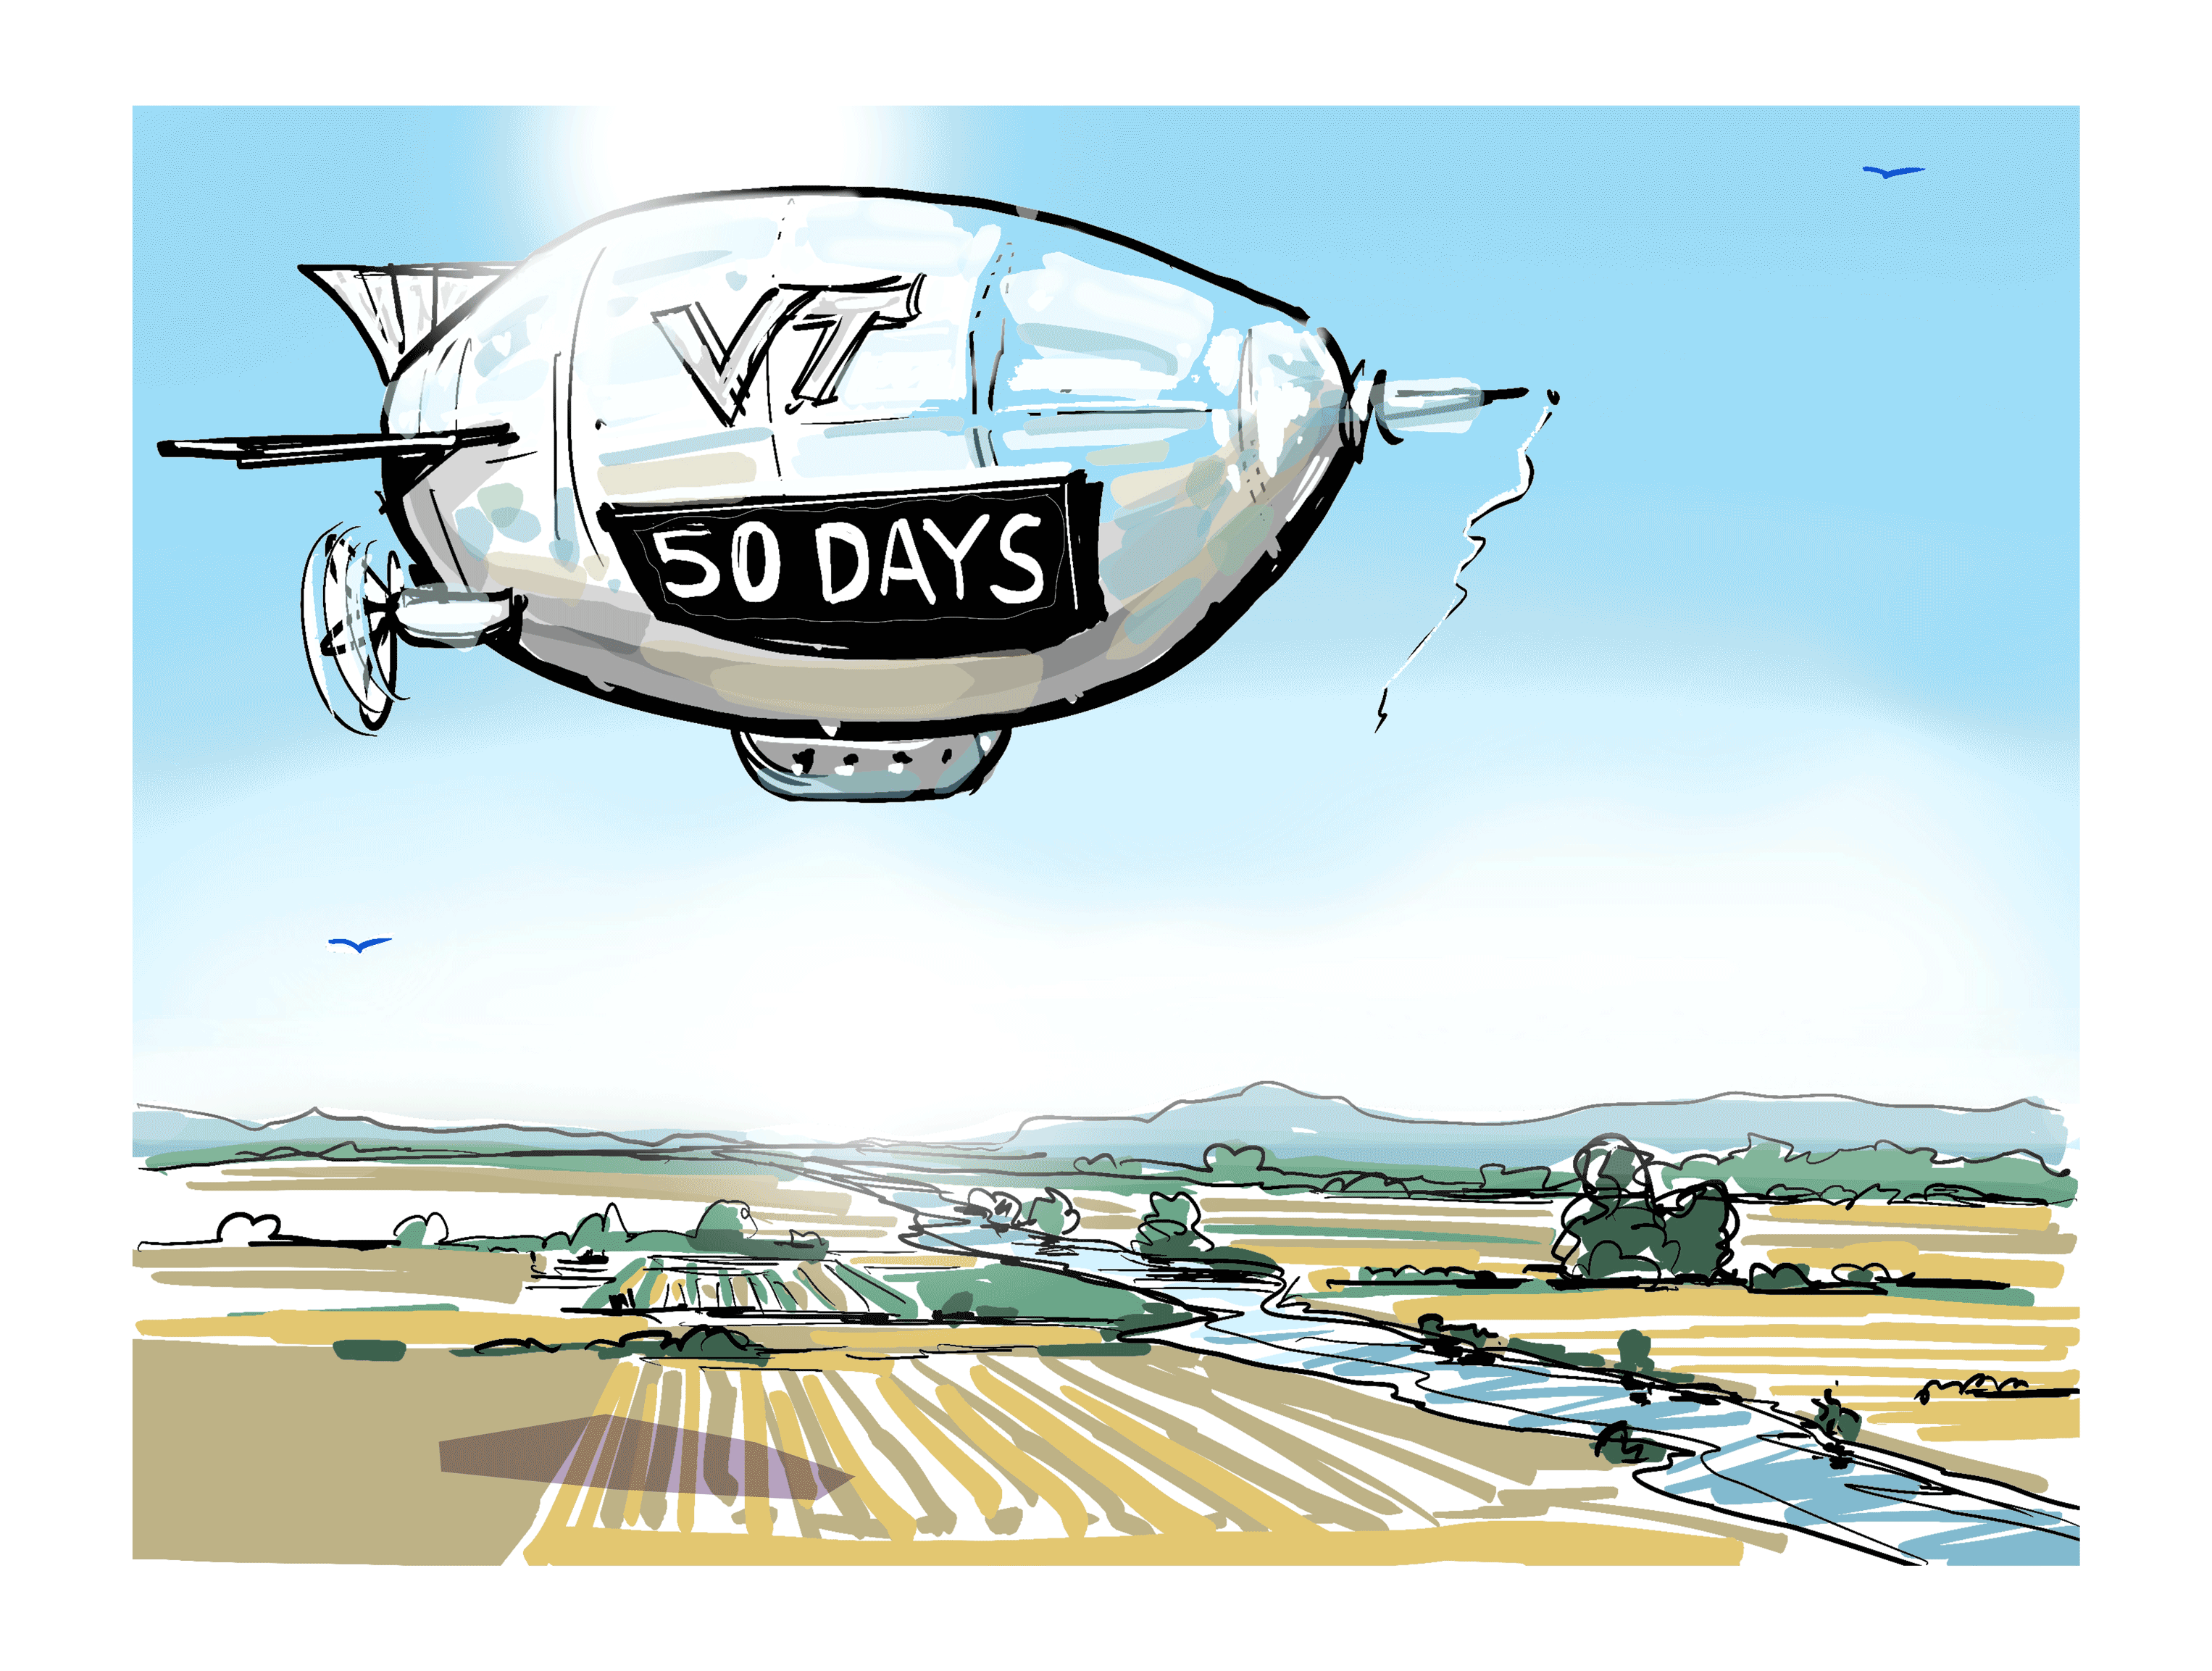 Digital animated blimp with "50 Days Until Commencement" Scrolling on its message board